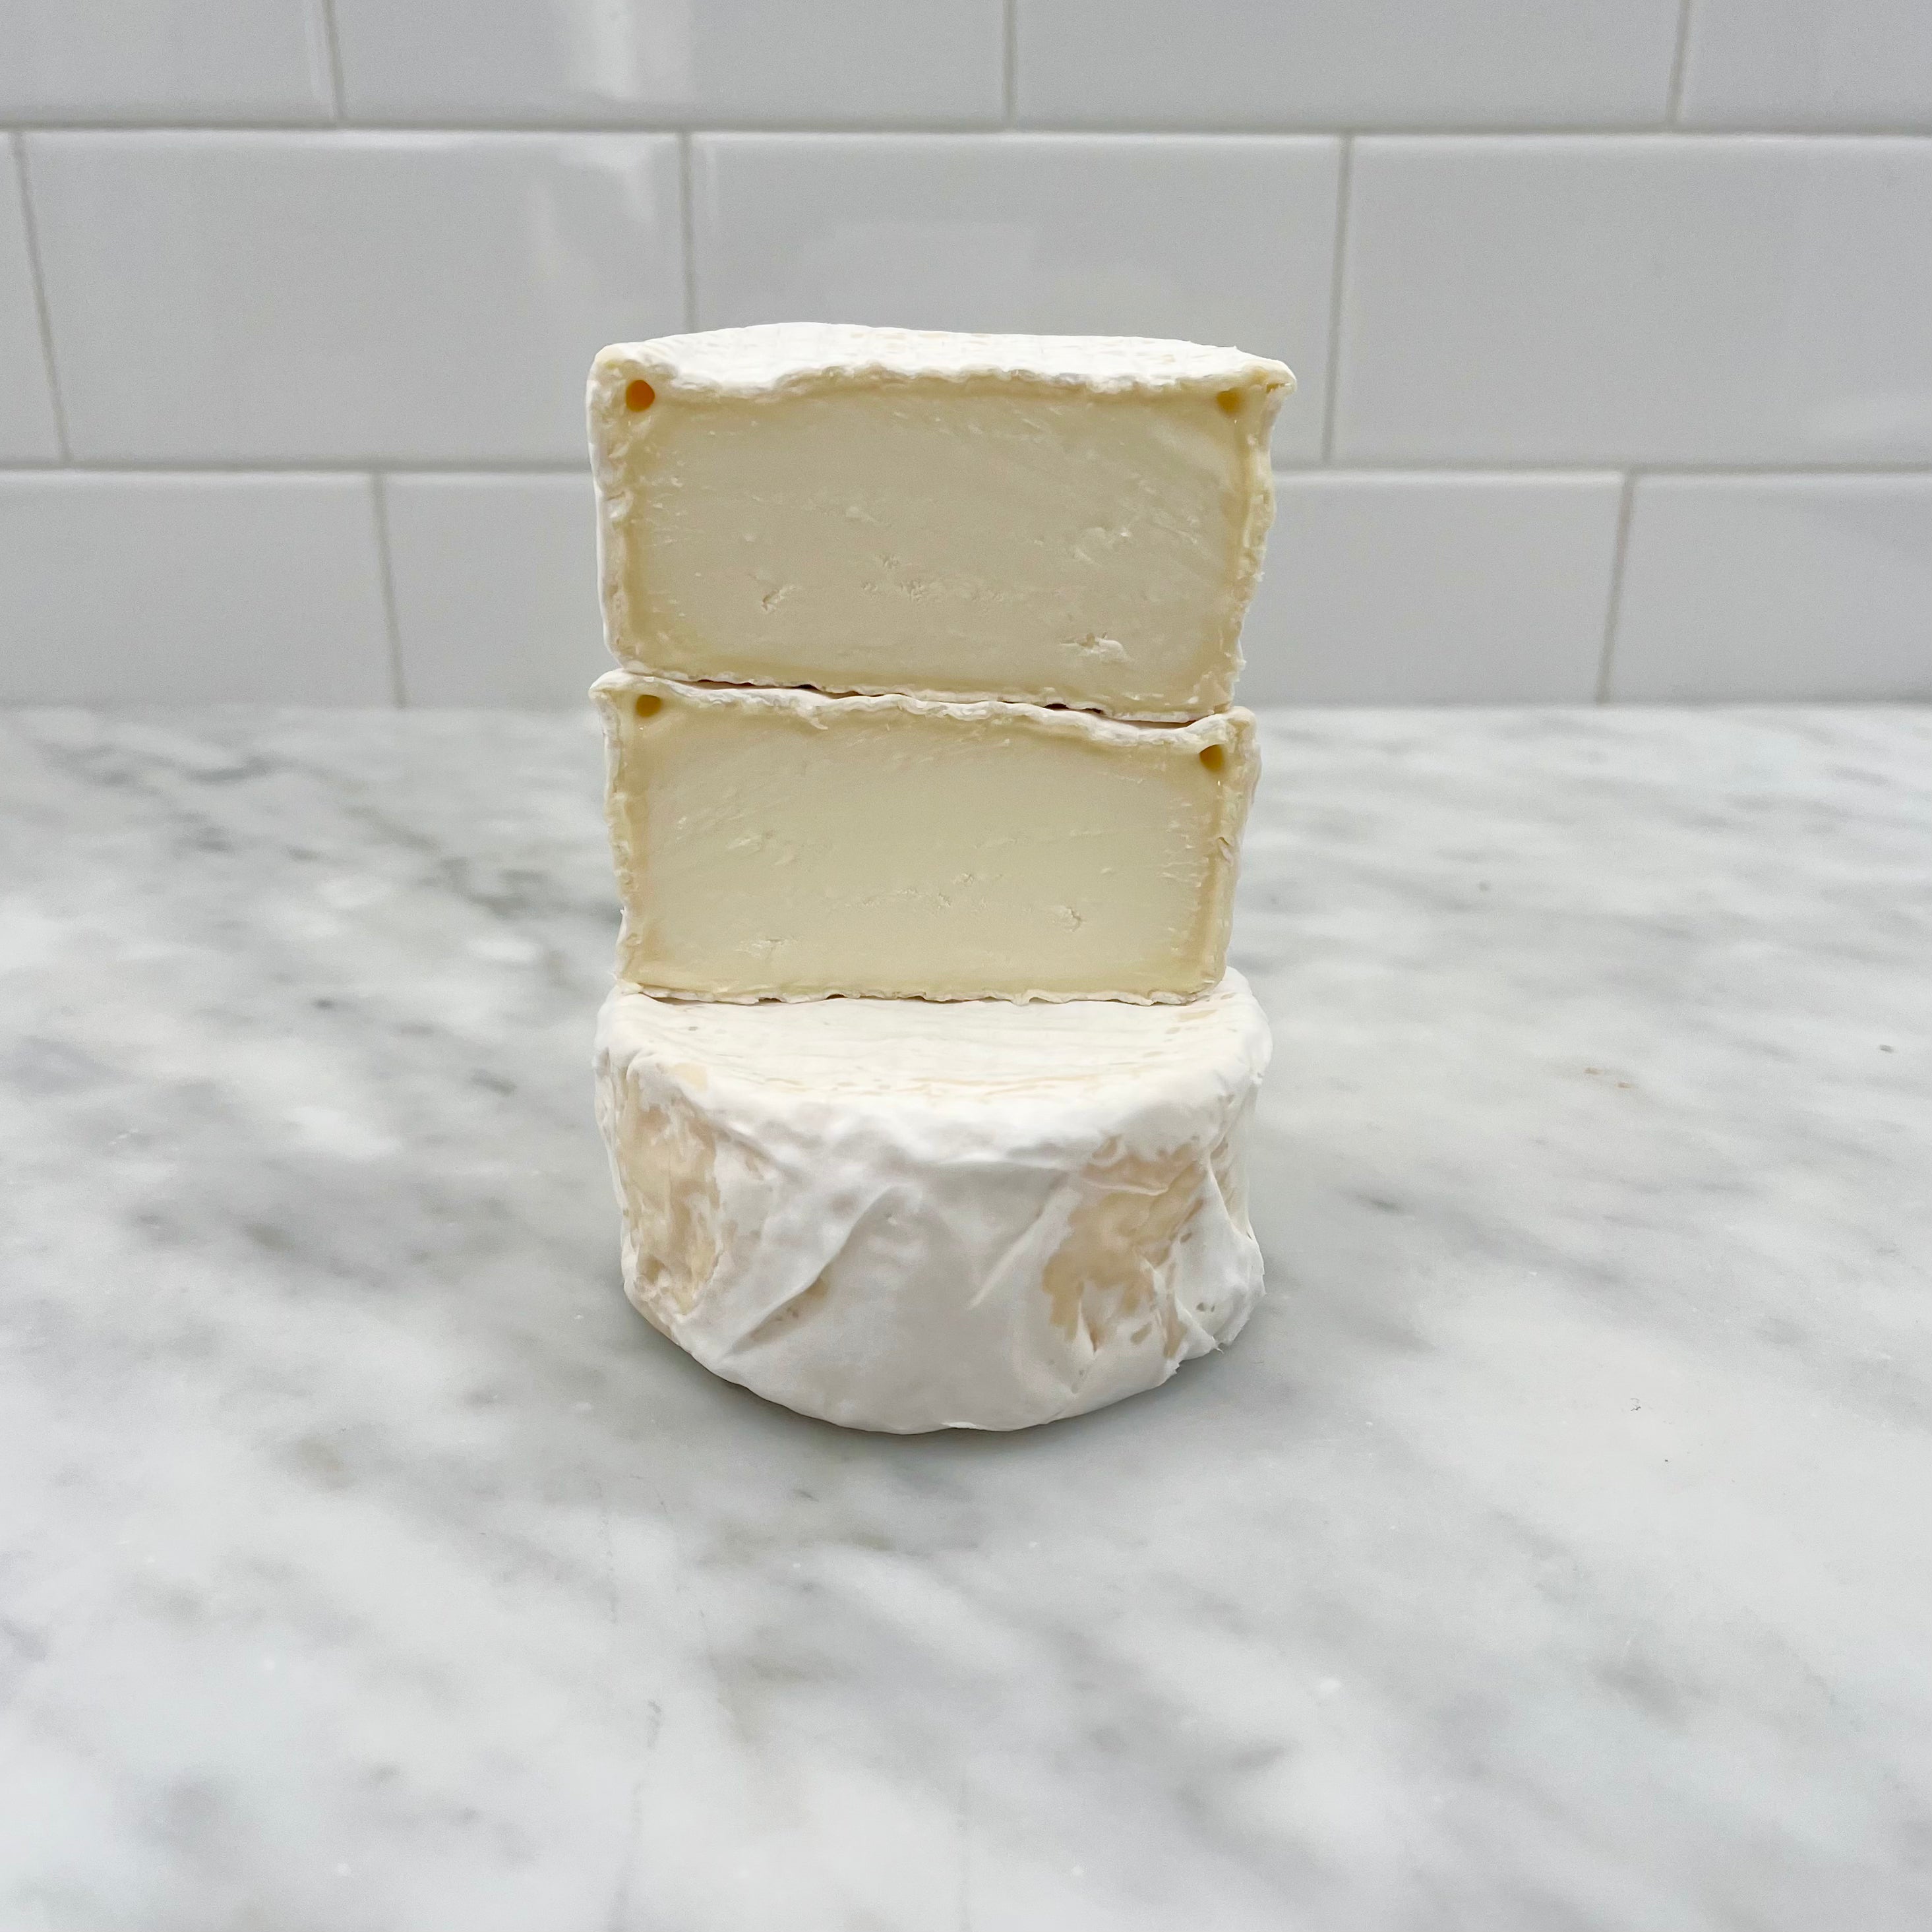 Three stacked pieces of white cheese on a marble surface.